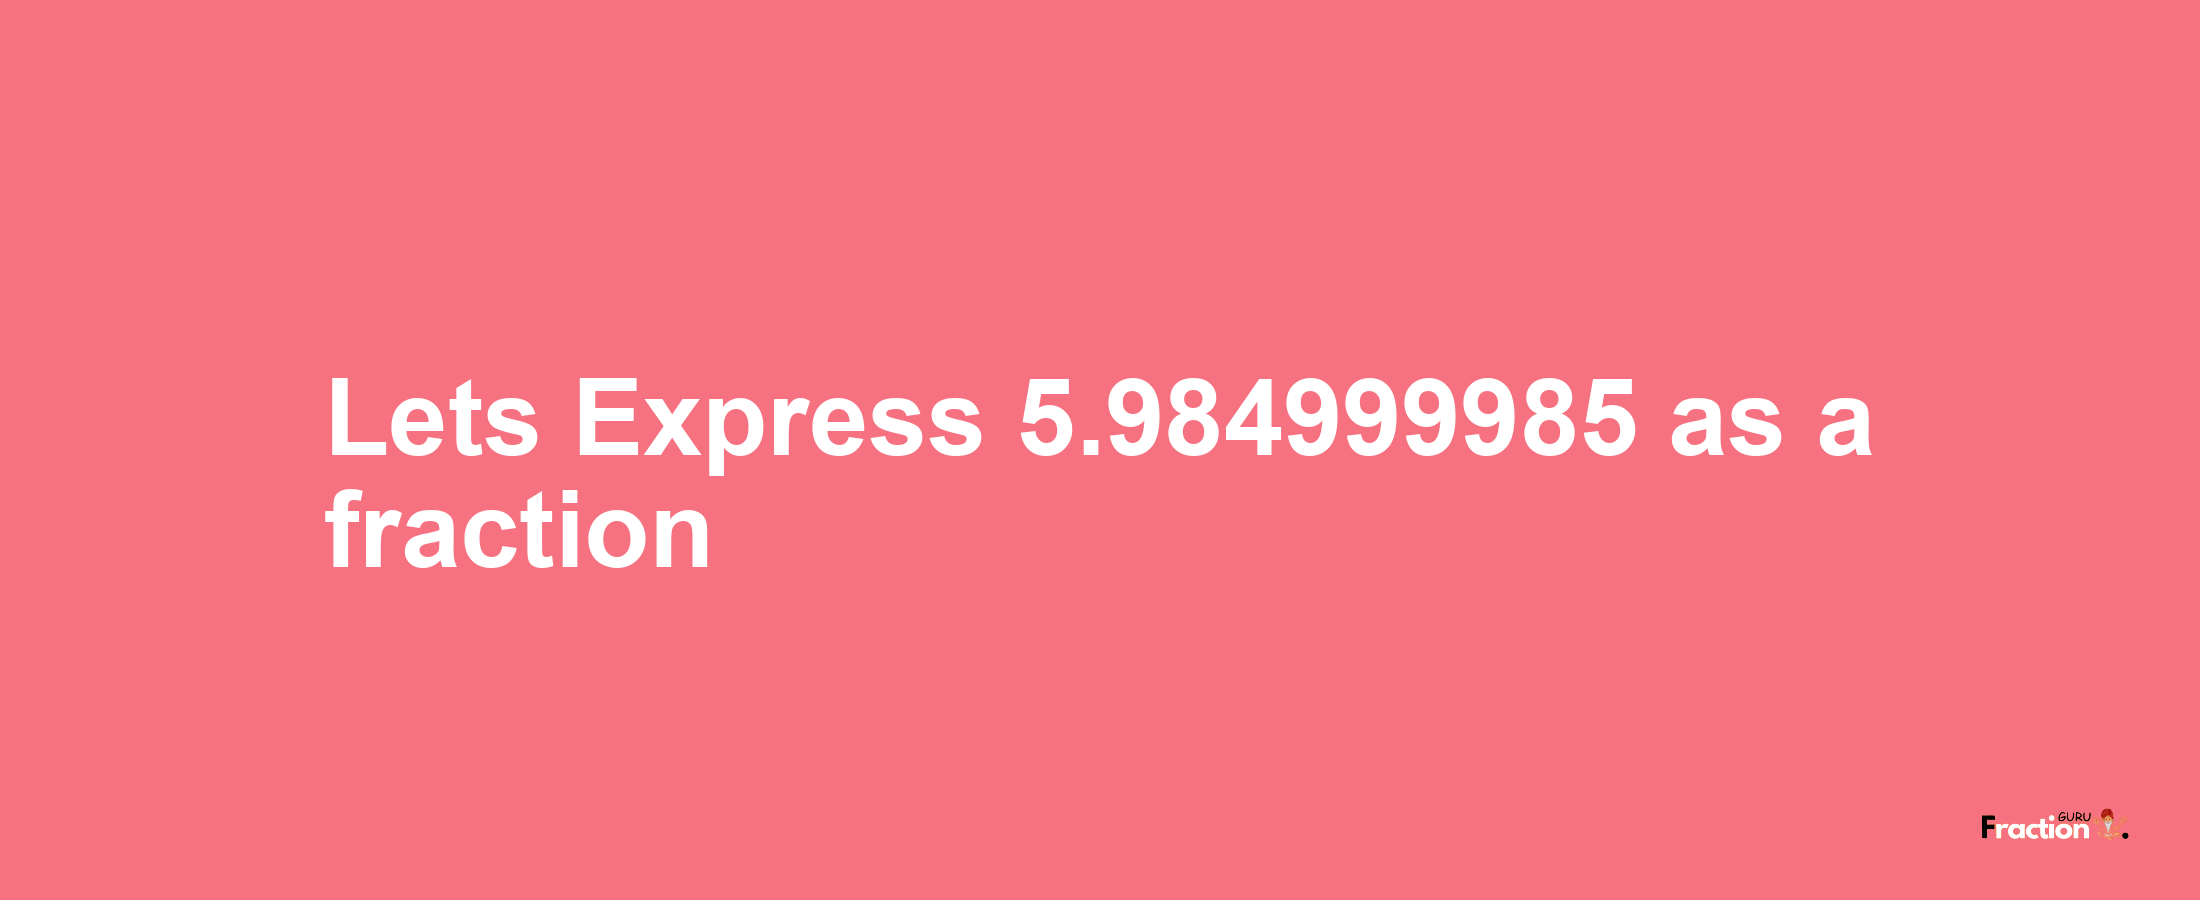 Lets Express 5.984999985 as afraction